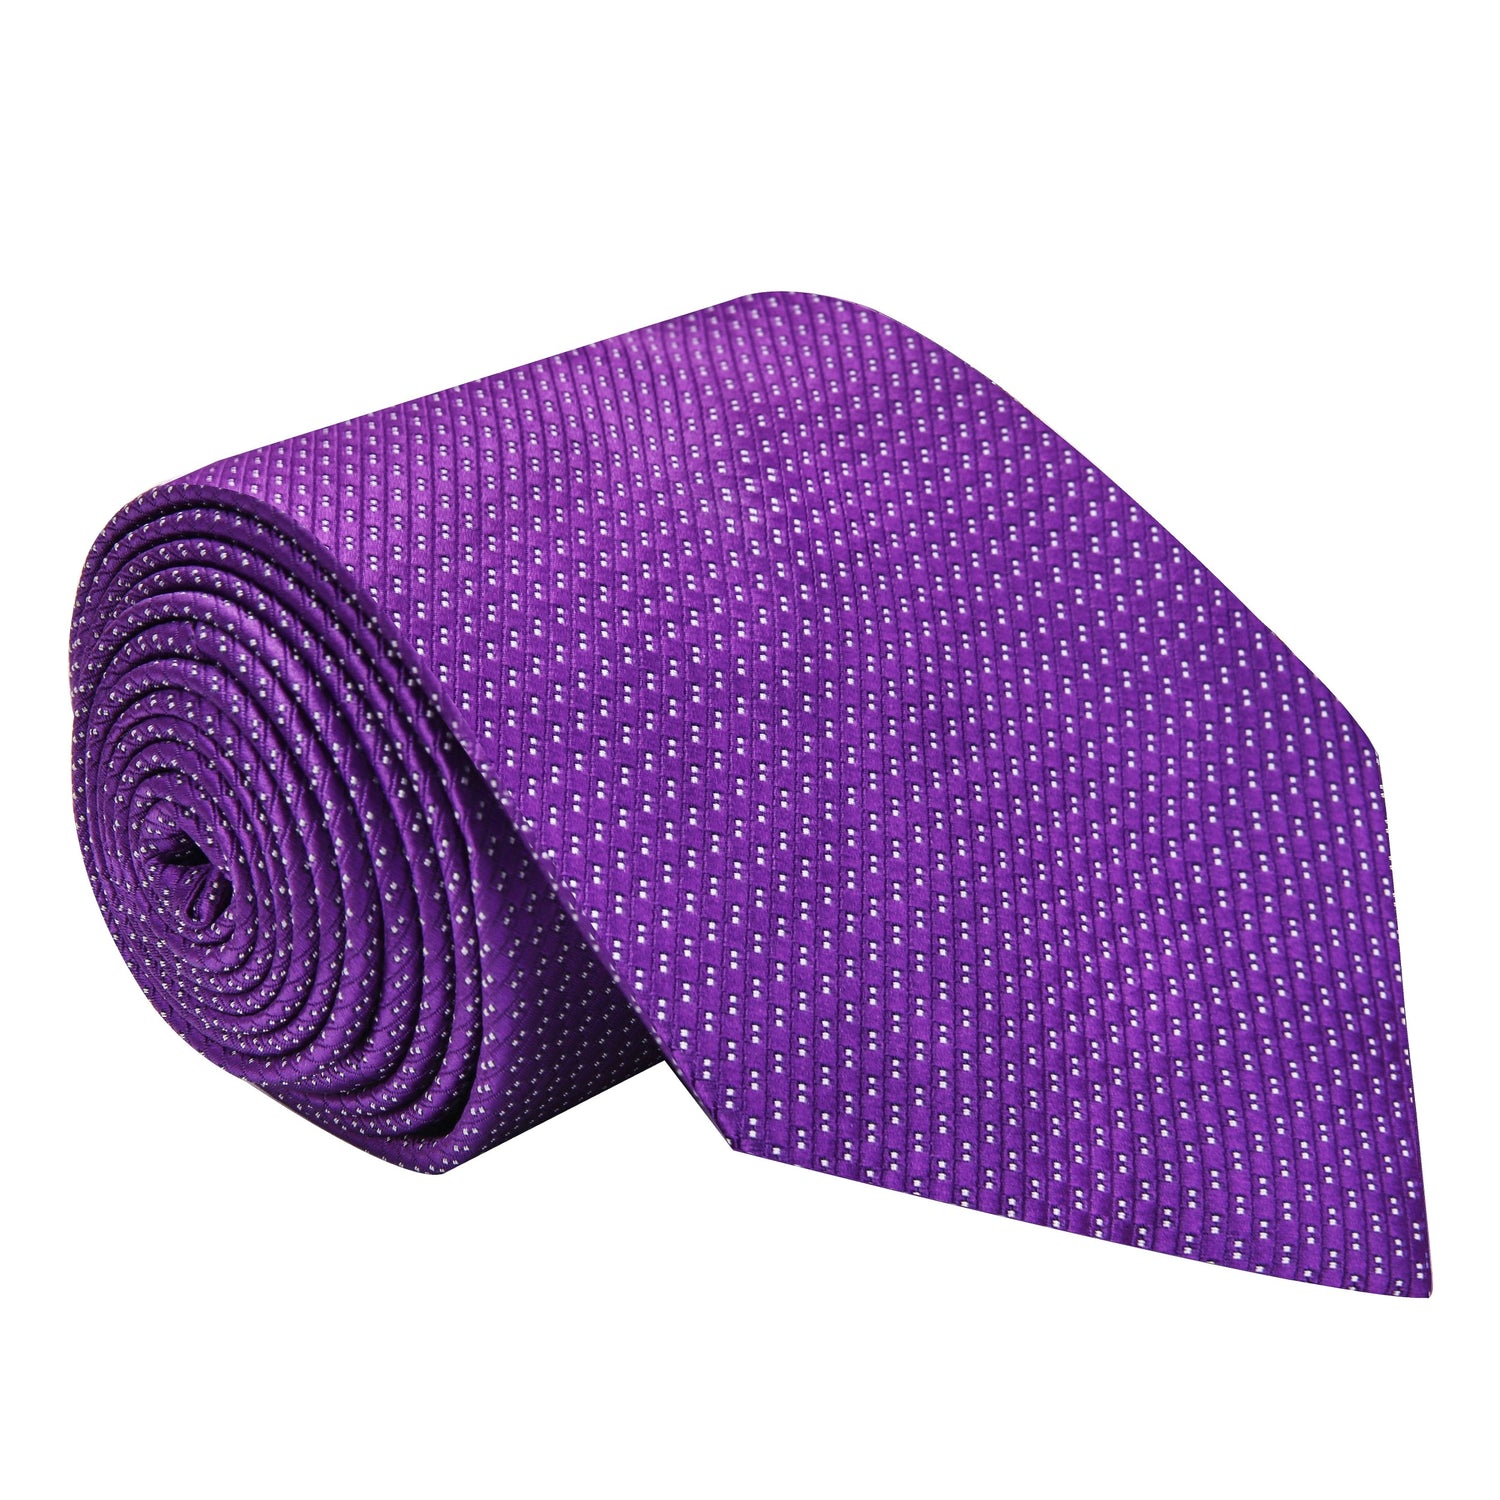 Purple with White Dots Tie 